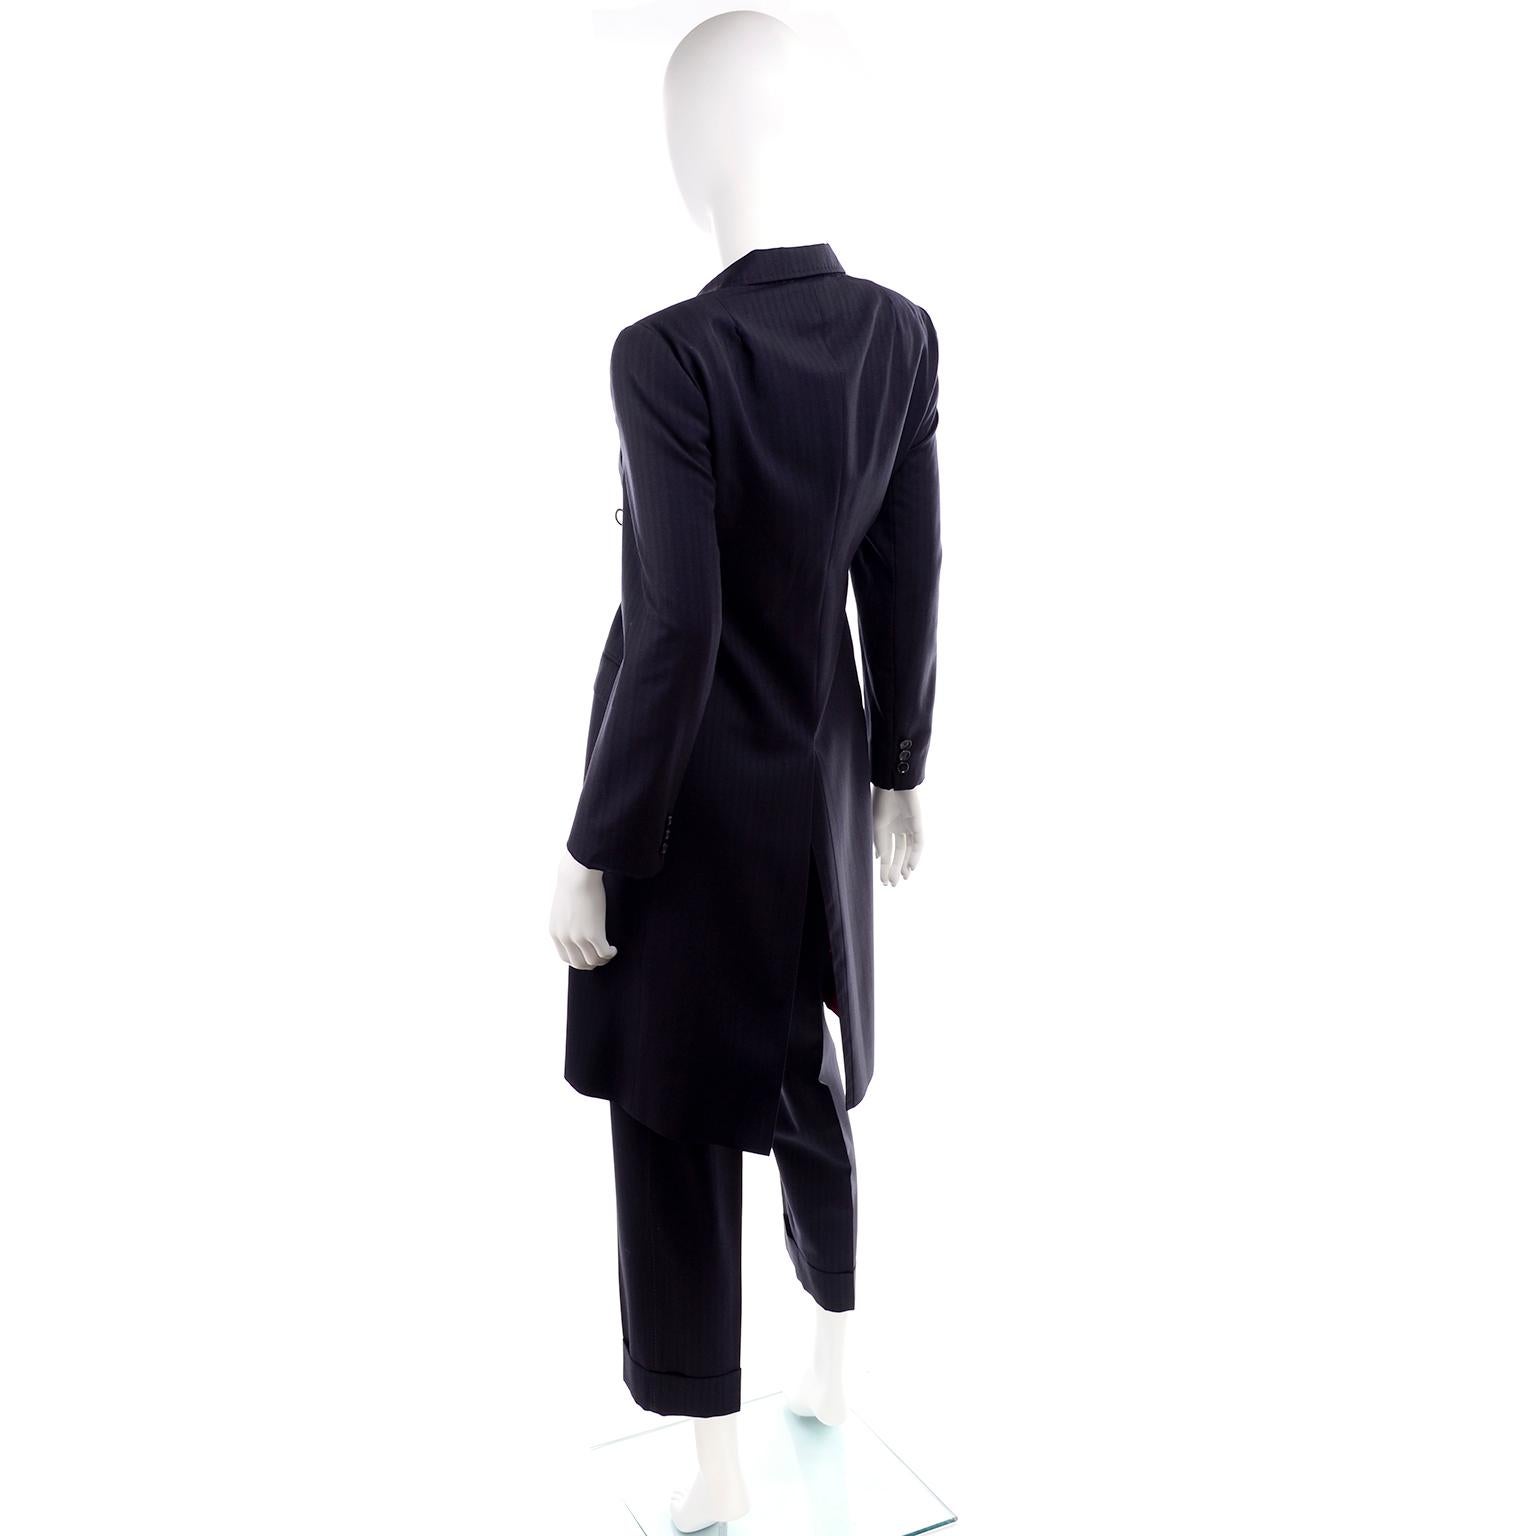 trouser suit with long jacket